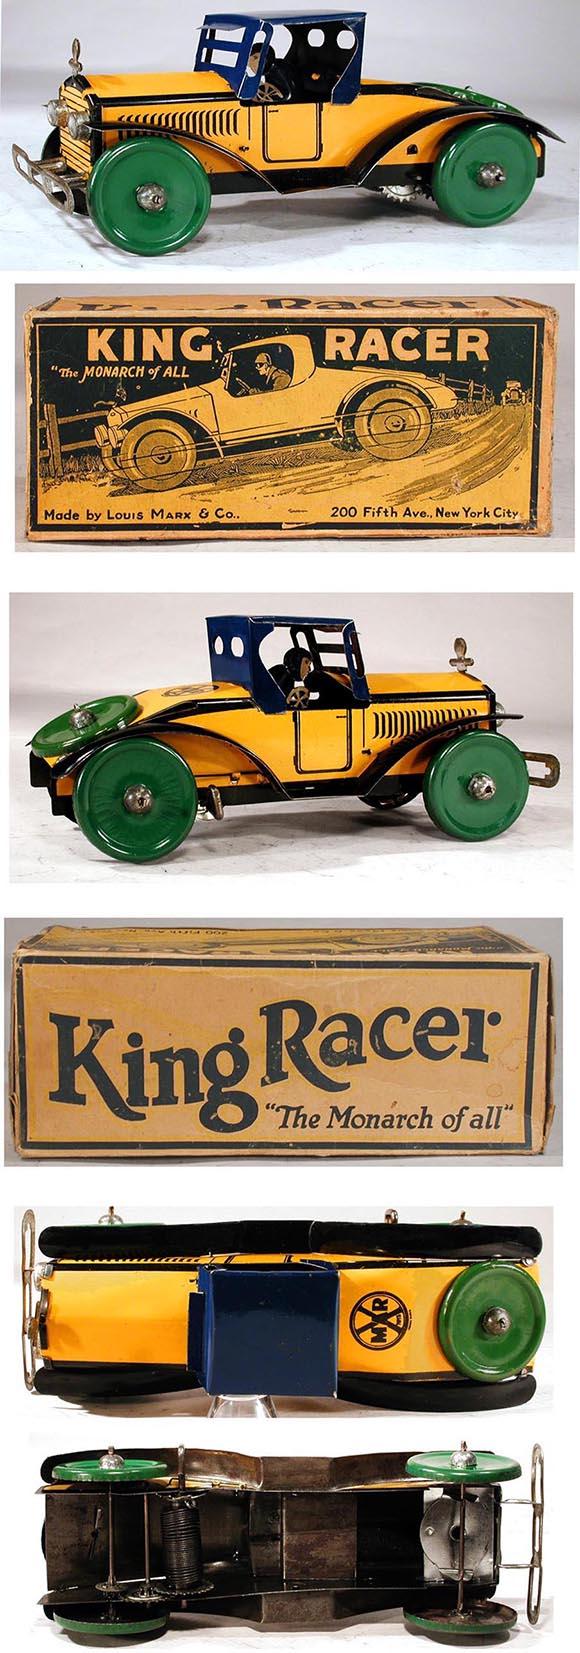 1925 Marx, King Racer (The Monarch of All) in Original Box